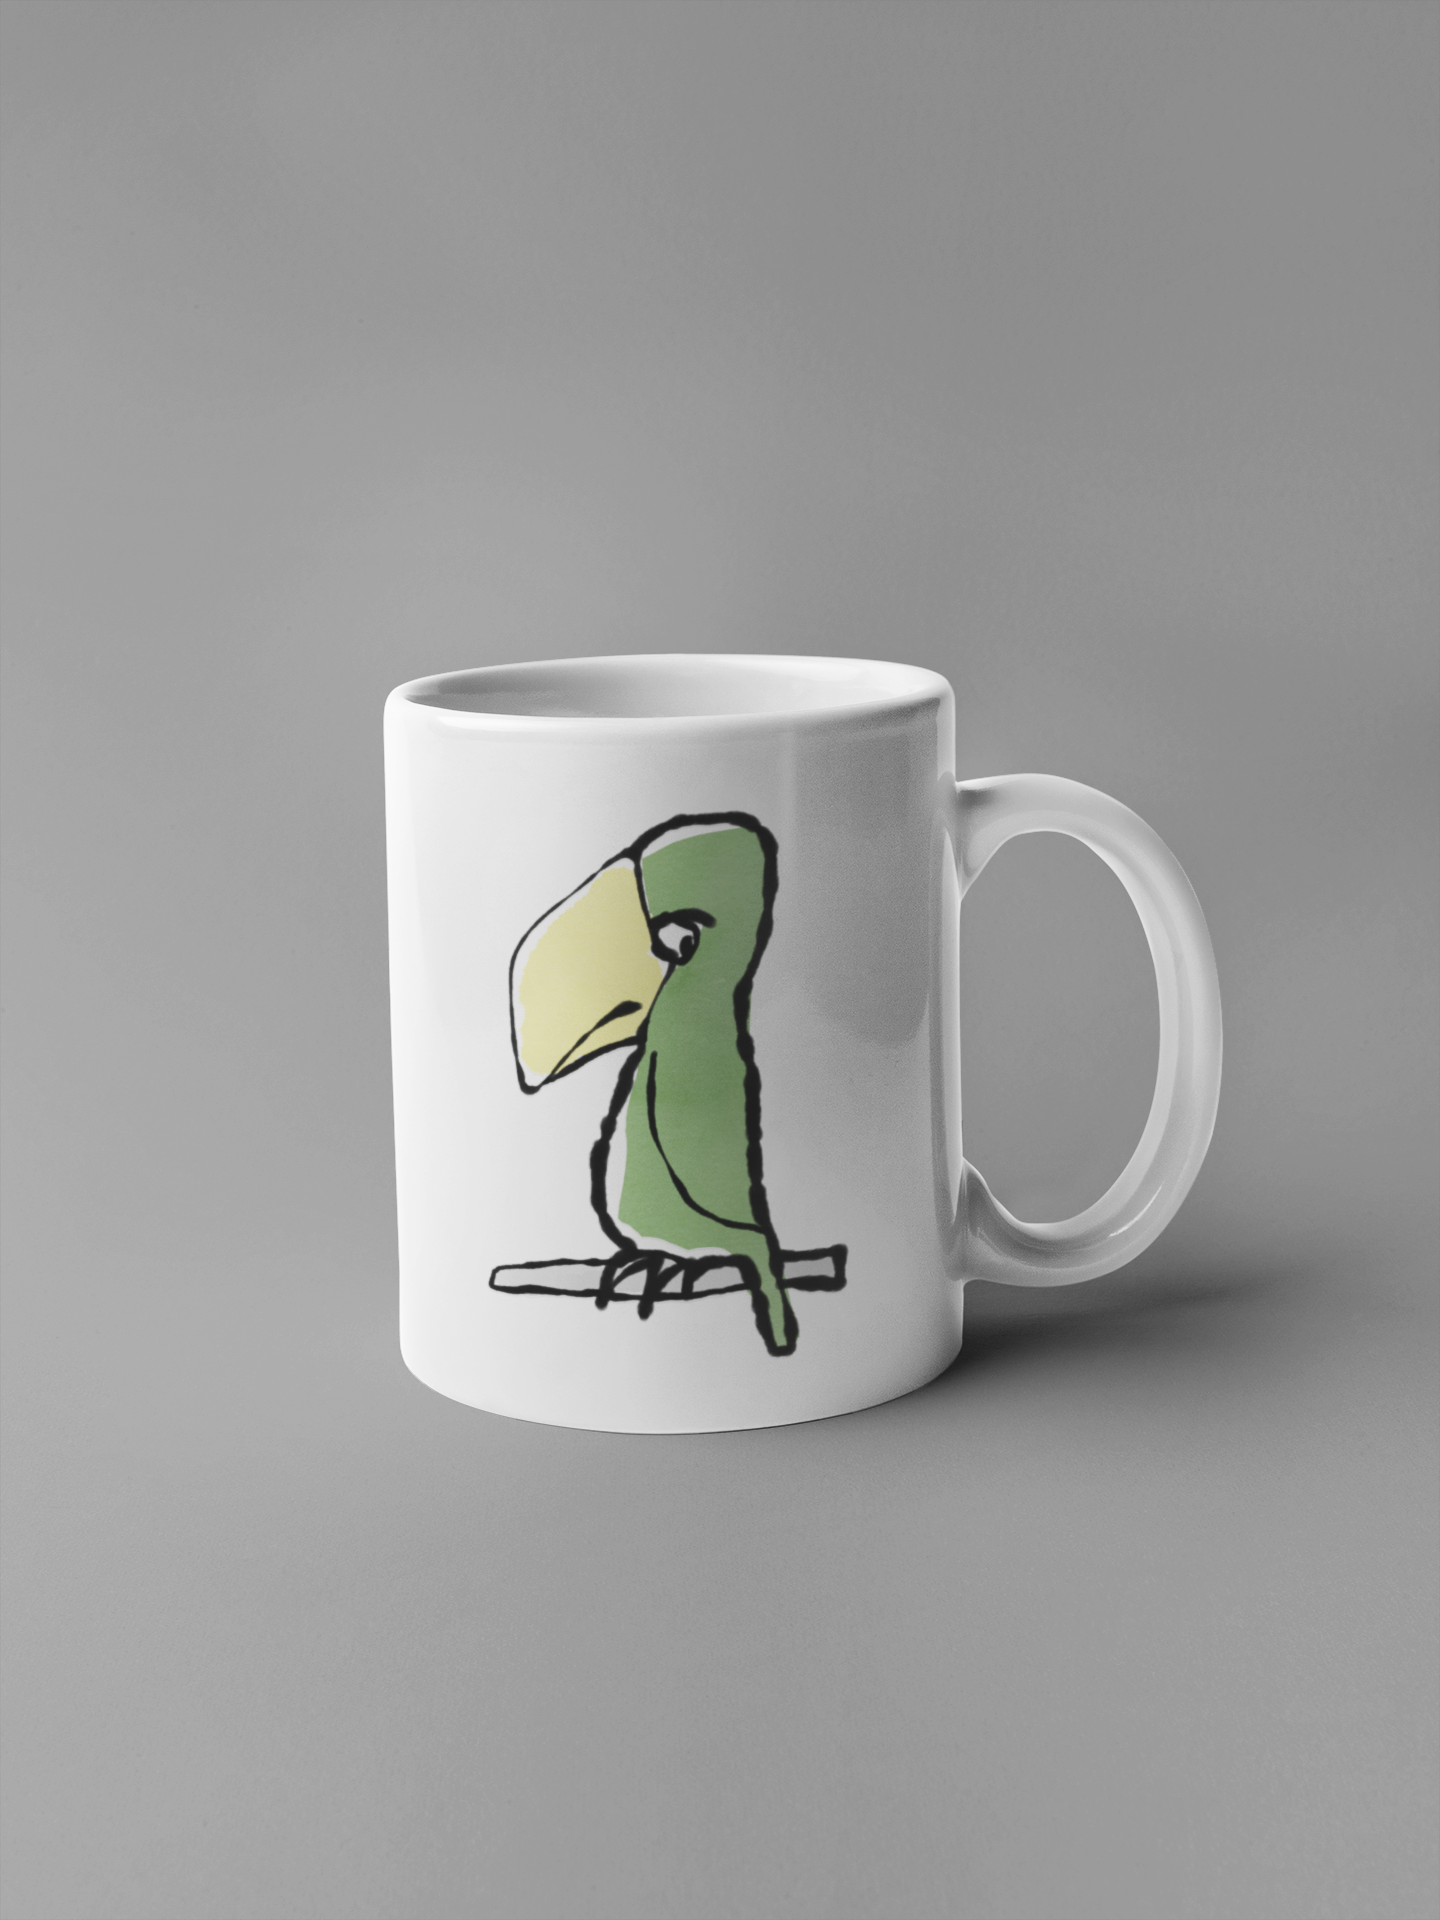 Funny Peter Parrot mug - Original Illustrated Parrot design on a coffee mug by Hector and Bone